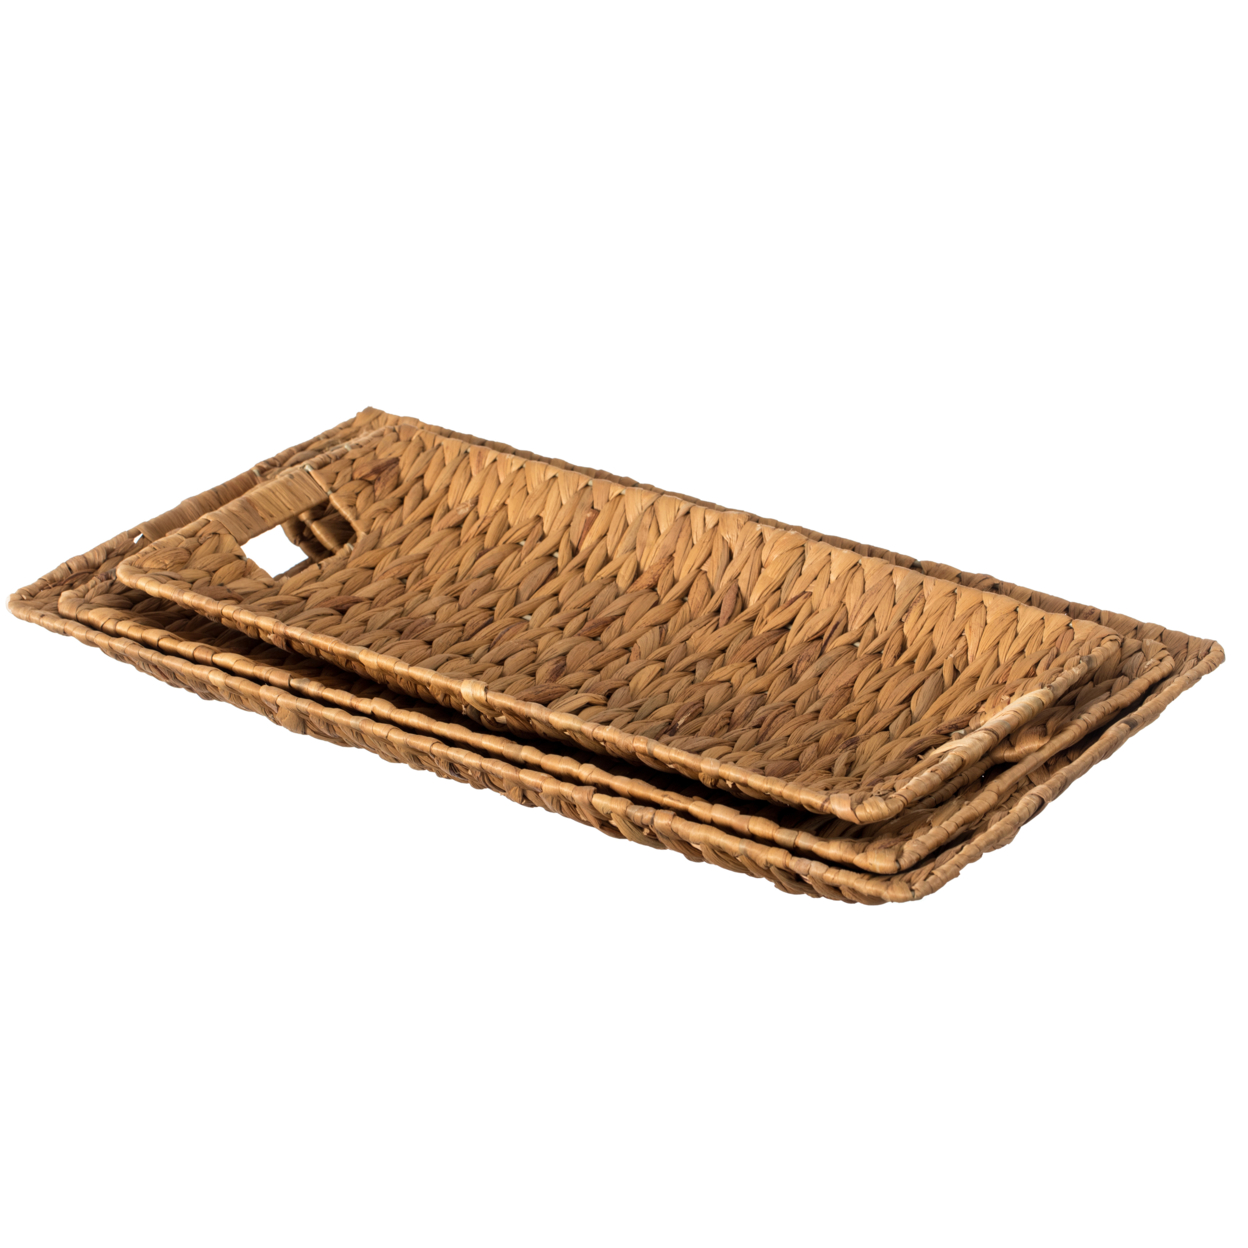 Natural Decorative Rectangular Hand-Woven Water Hyacinth Serving Tray With Built-in Handles - Large